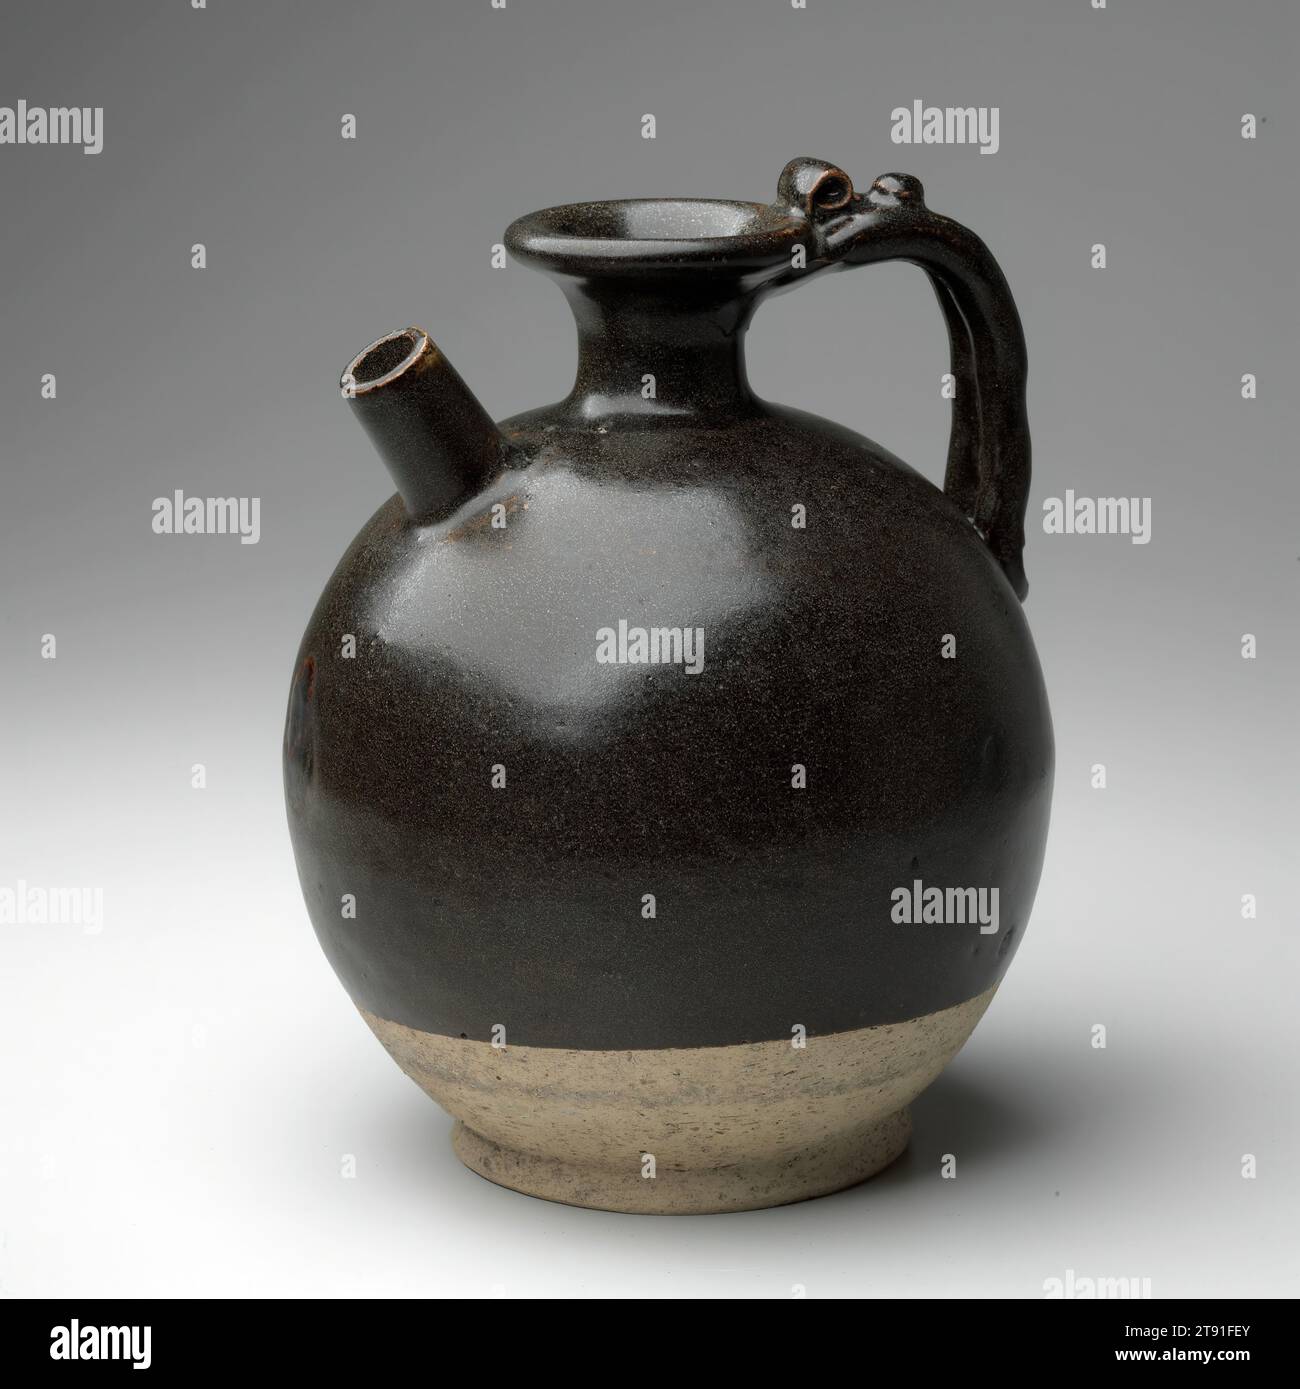 Ewer, 8th-9th century, 9-1/4 x 7-1/2 x 7-1/2 in. (23.5 x 19.1 x 19.1 cm), Huangpu ware Stoneware with dark-brown glaze, China, 8th-9th century, This well-proportioned, globular shaped ewer stands on a solid foot. It has a short, straight spout and a handle of joined double strands that arcs between shoulder and lip. The overall effect is pleasing: a simple robust shape combined with a thick, dark uniform glaze. Such ewers made their debut in the Sui dynasty (586-618), supplanting the 'chicken-head ewers' and their descendants. Some of these vessels were used in the making of tea Stock Photo